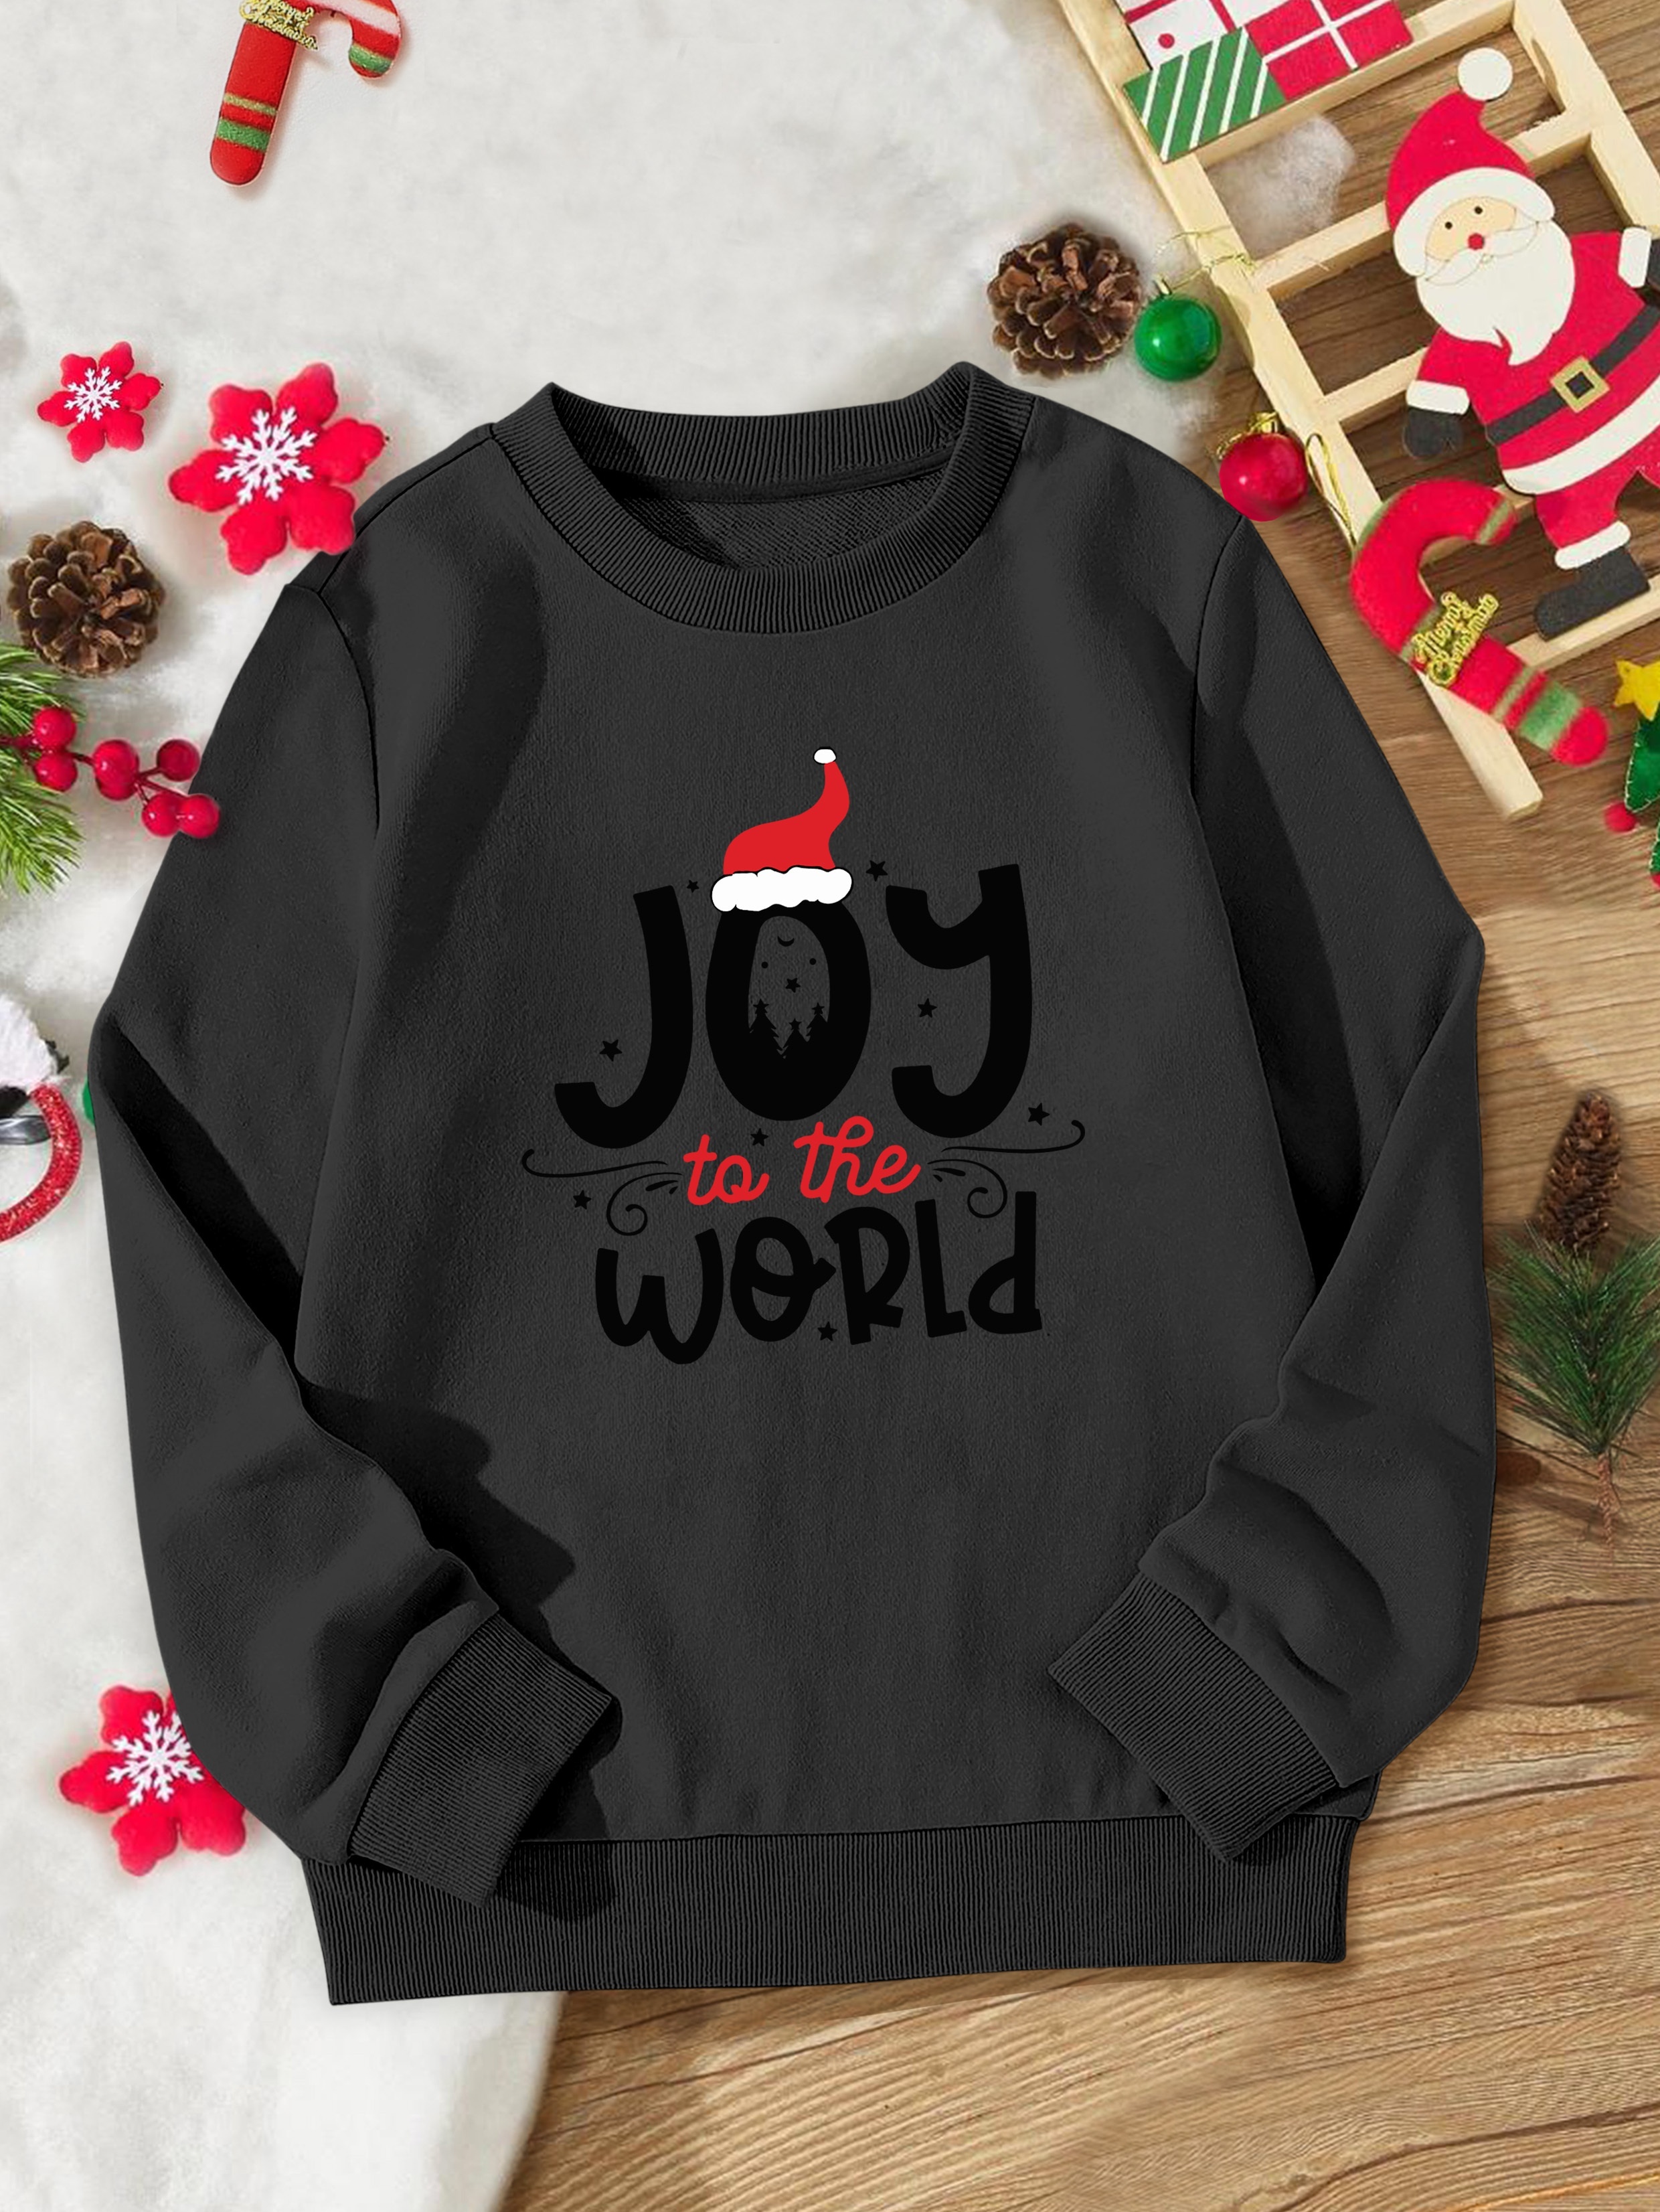 Christmas Gifts for Preschool Girls - Joy in the Works